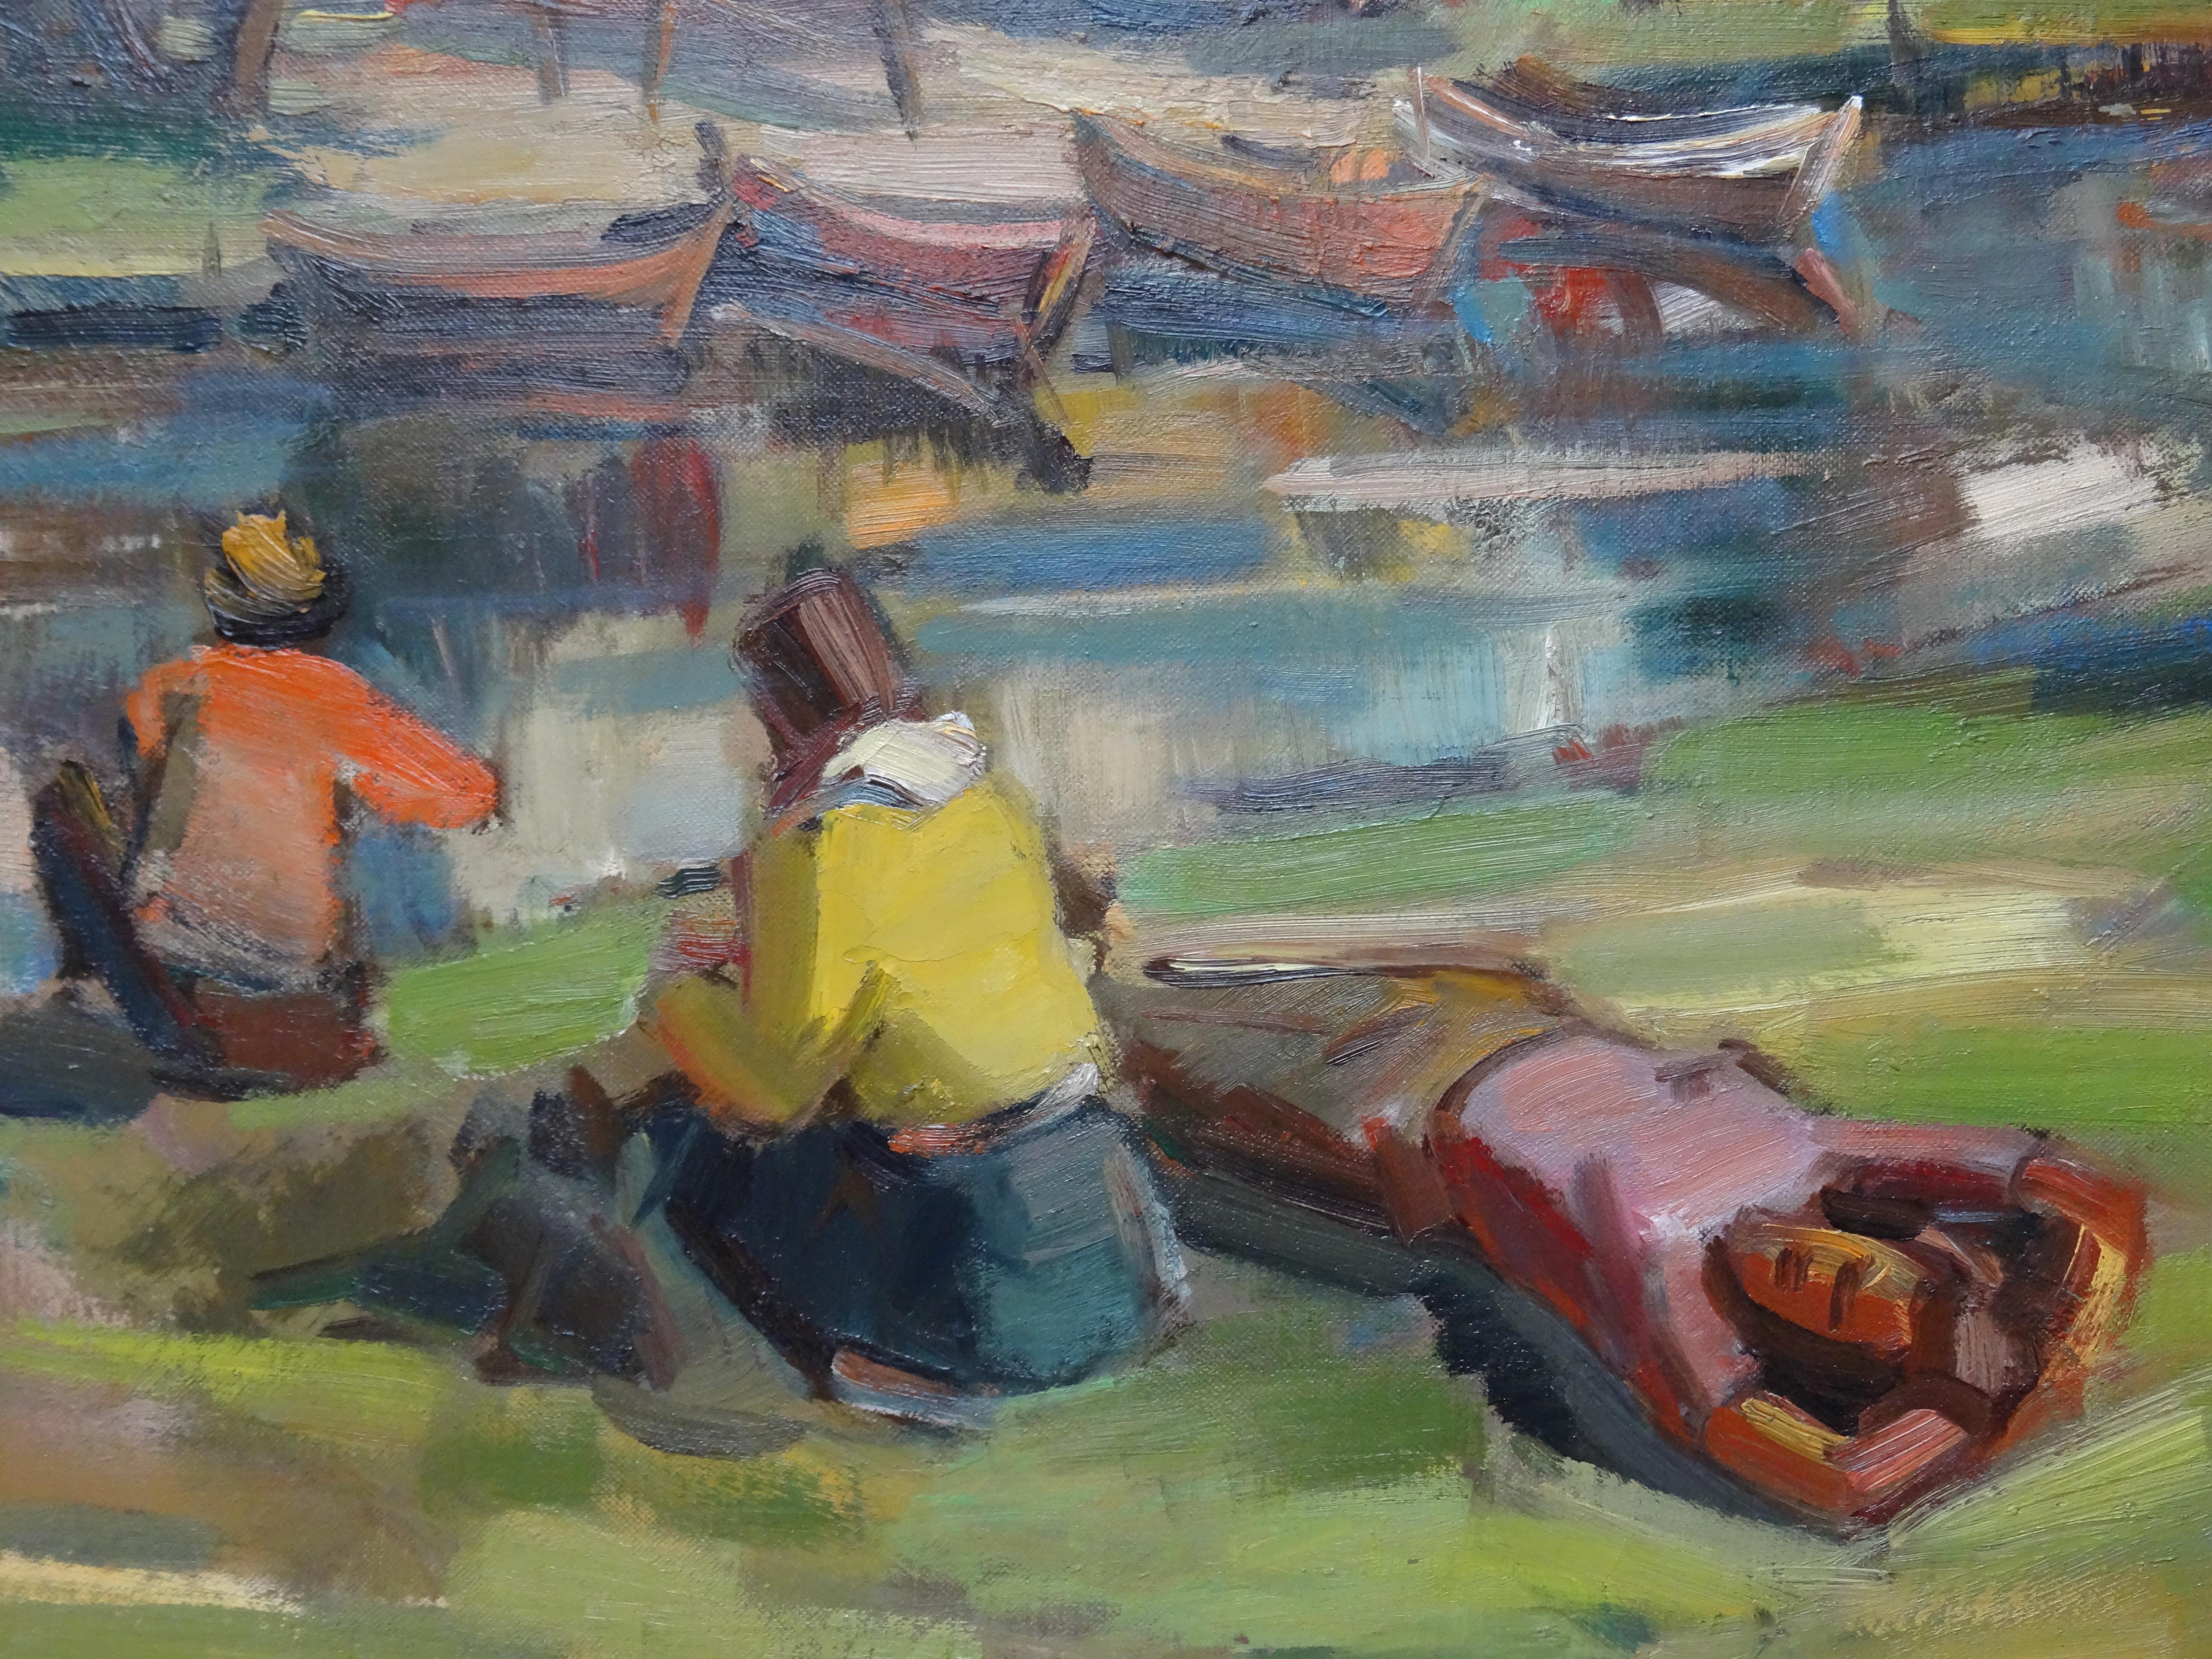 By the river. Canvas, cardboard, oil, 55.5x70.5 cm - Impressionist Painting by Janis Rudolfs Zuntaks